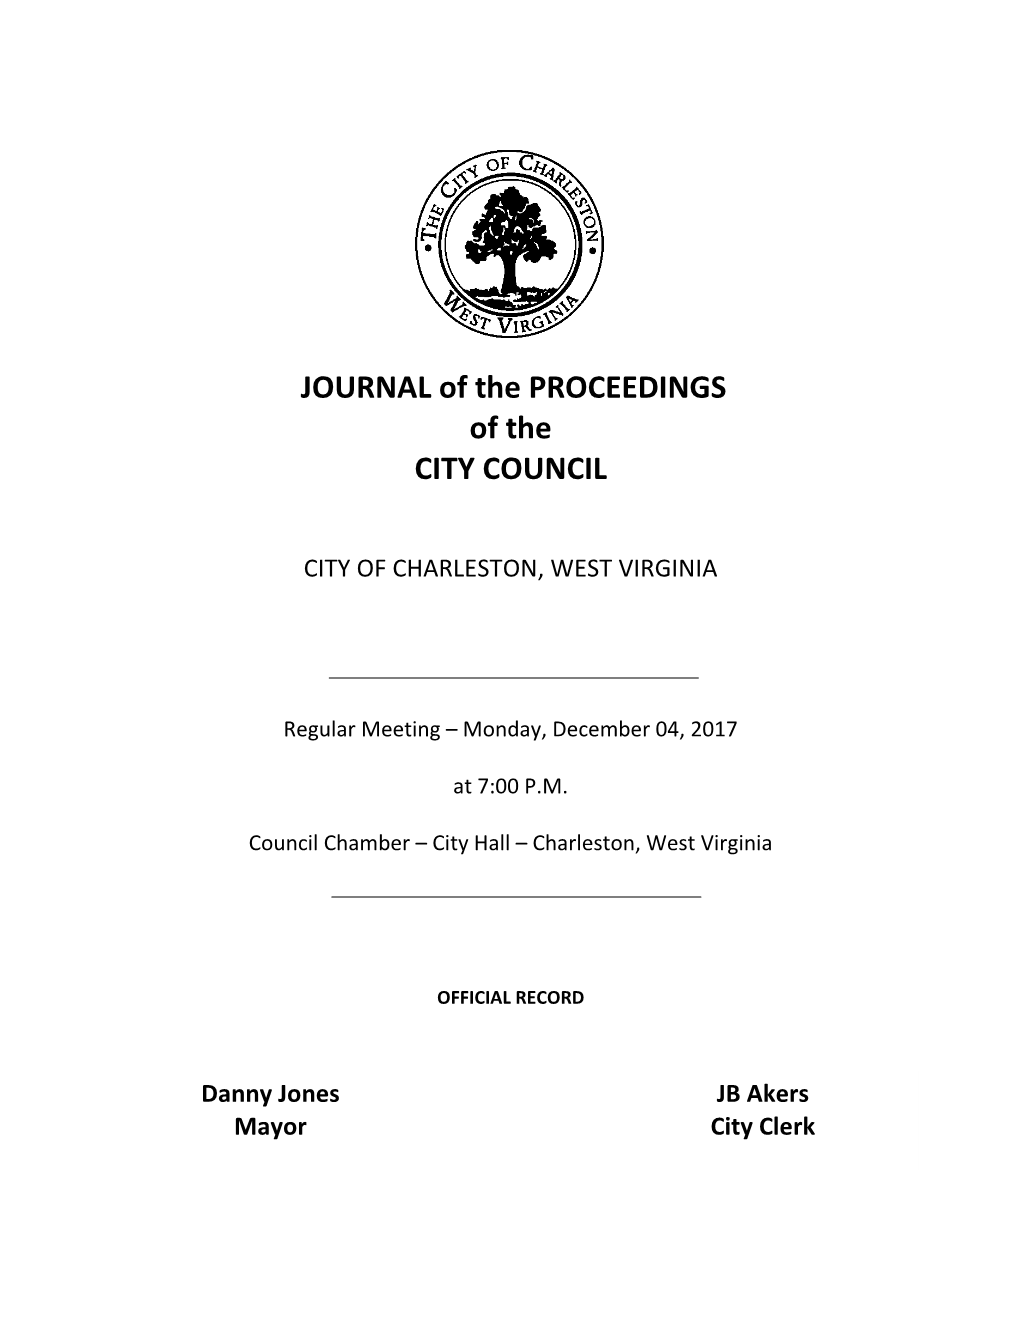 JOURNAL of the PROCEEDINGS of the CITY COUNCIL